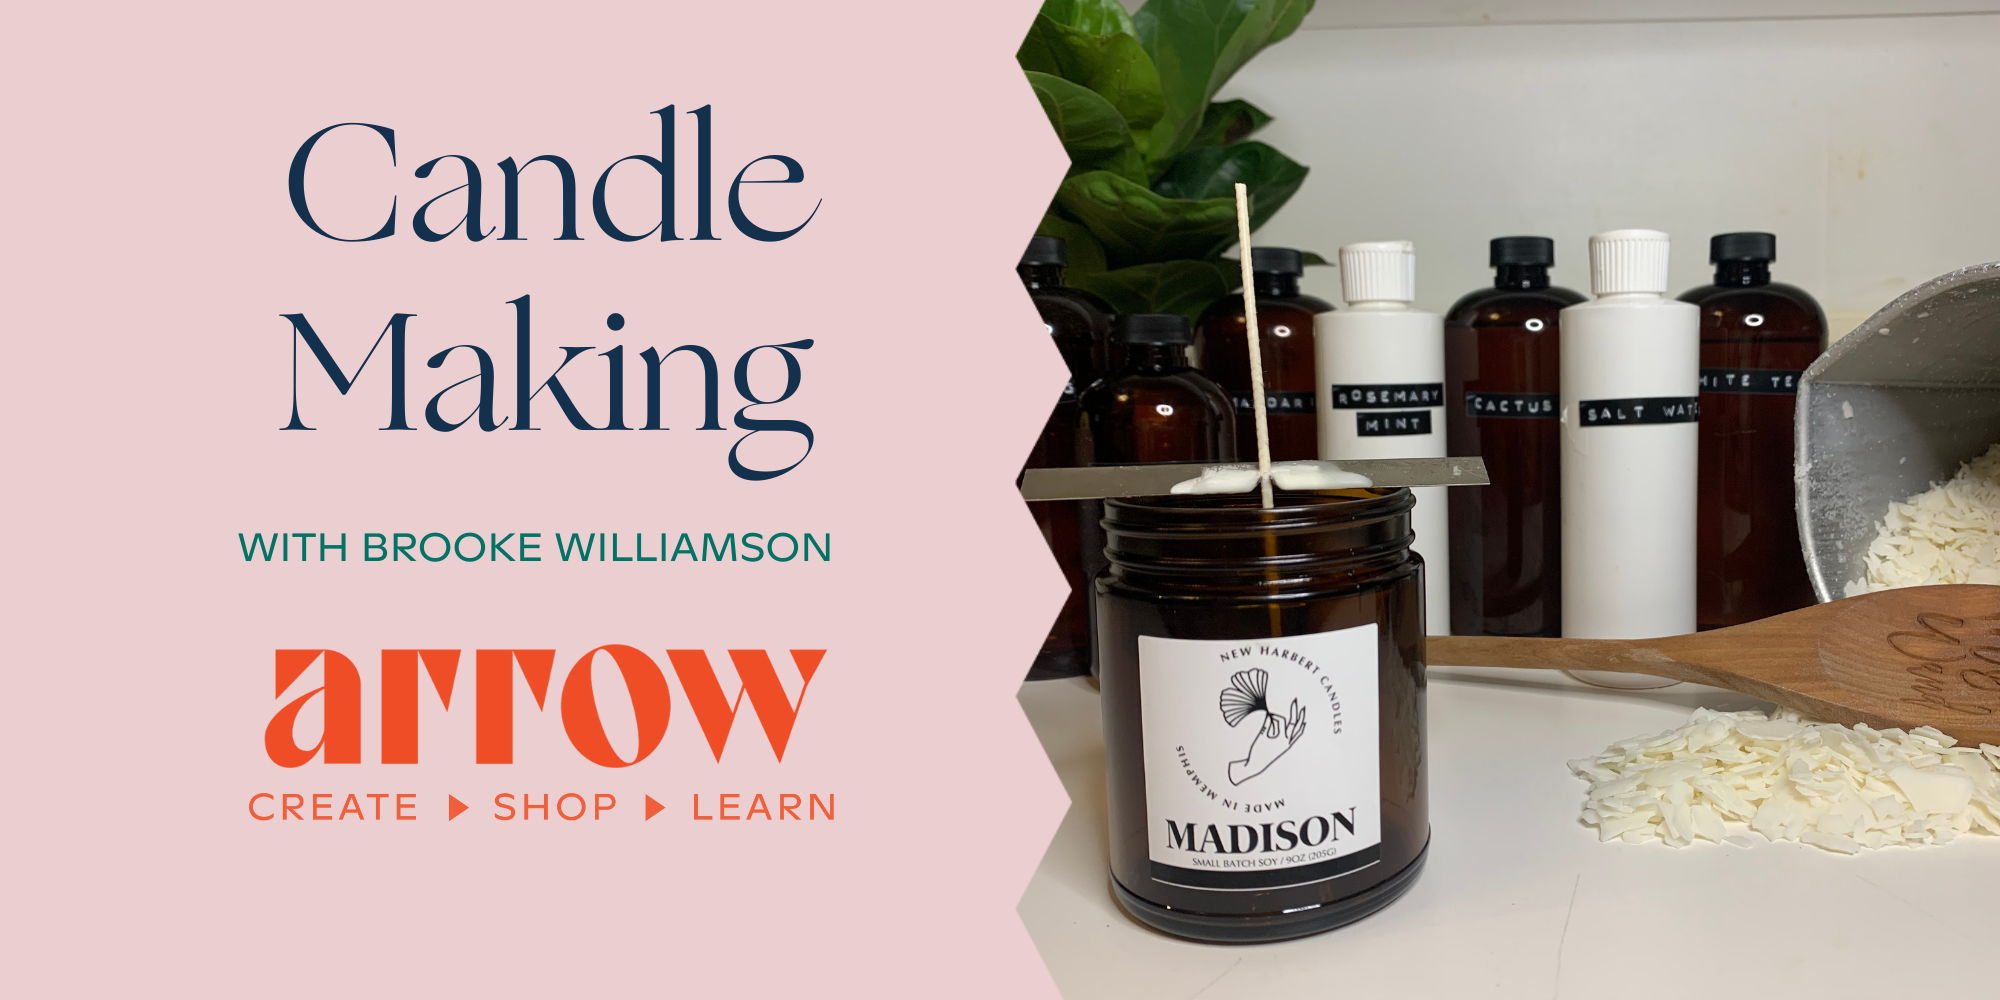 Candle Making with Brooke Williamson - Powered by Arrow promotional image